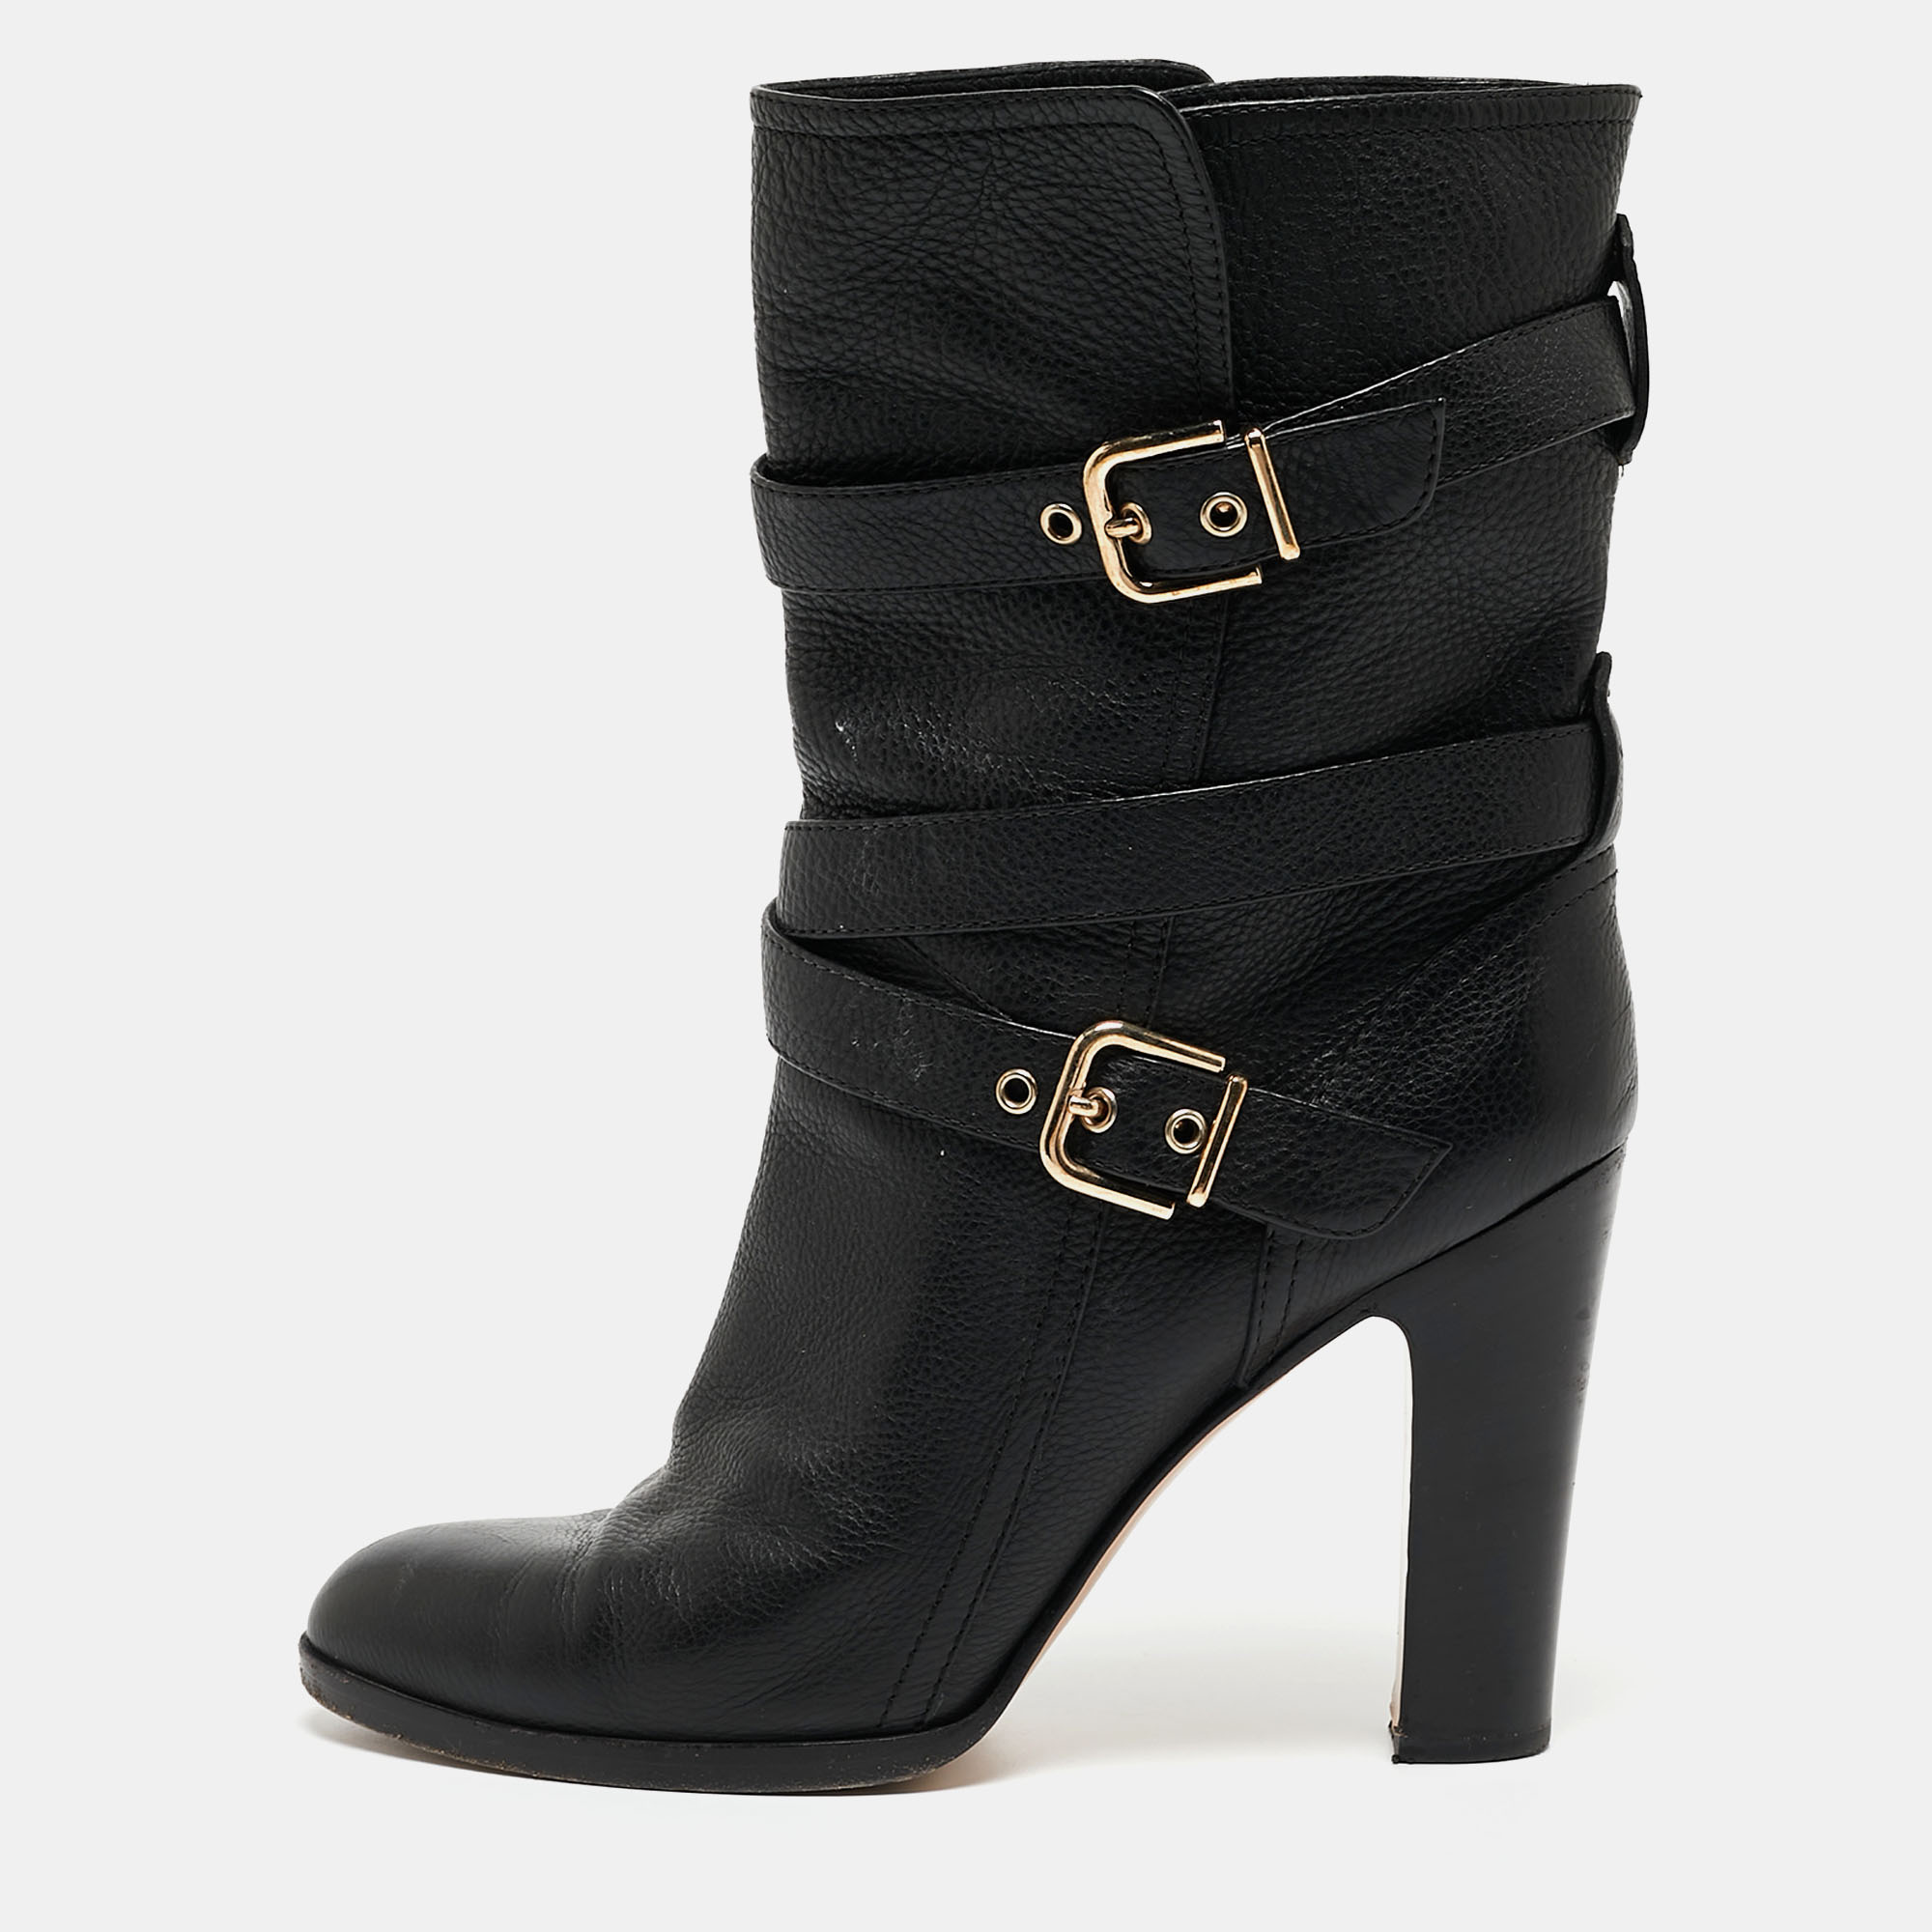 Gianvito Rossi Black Leather Buckle Detail Mid Calf Boots Size 40